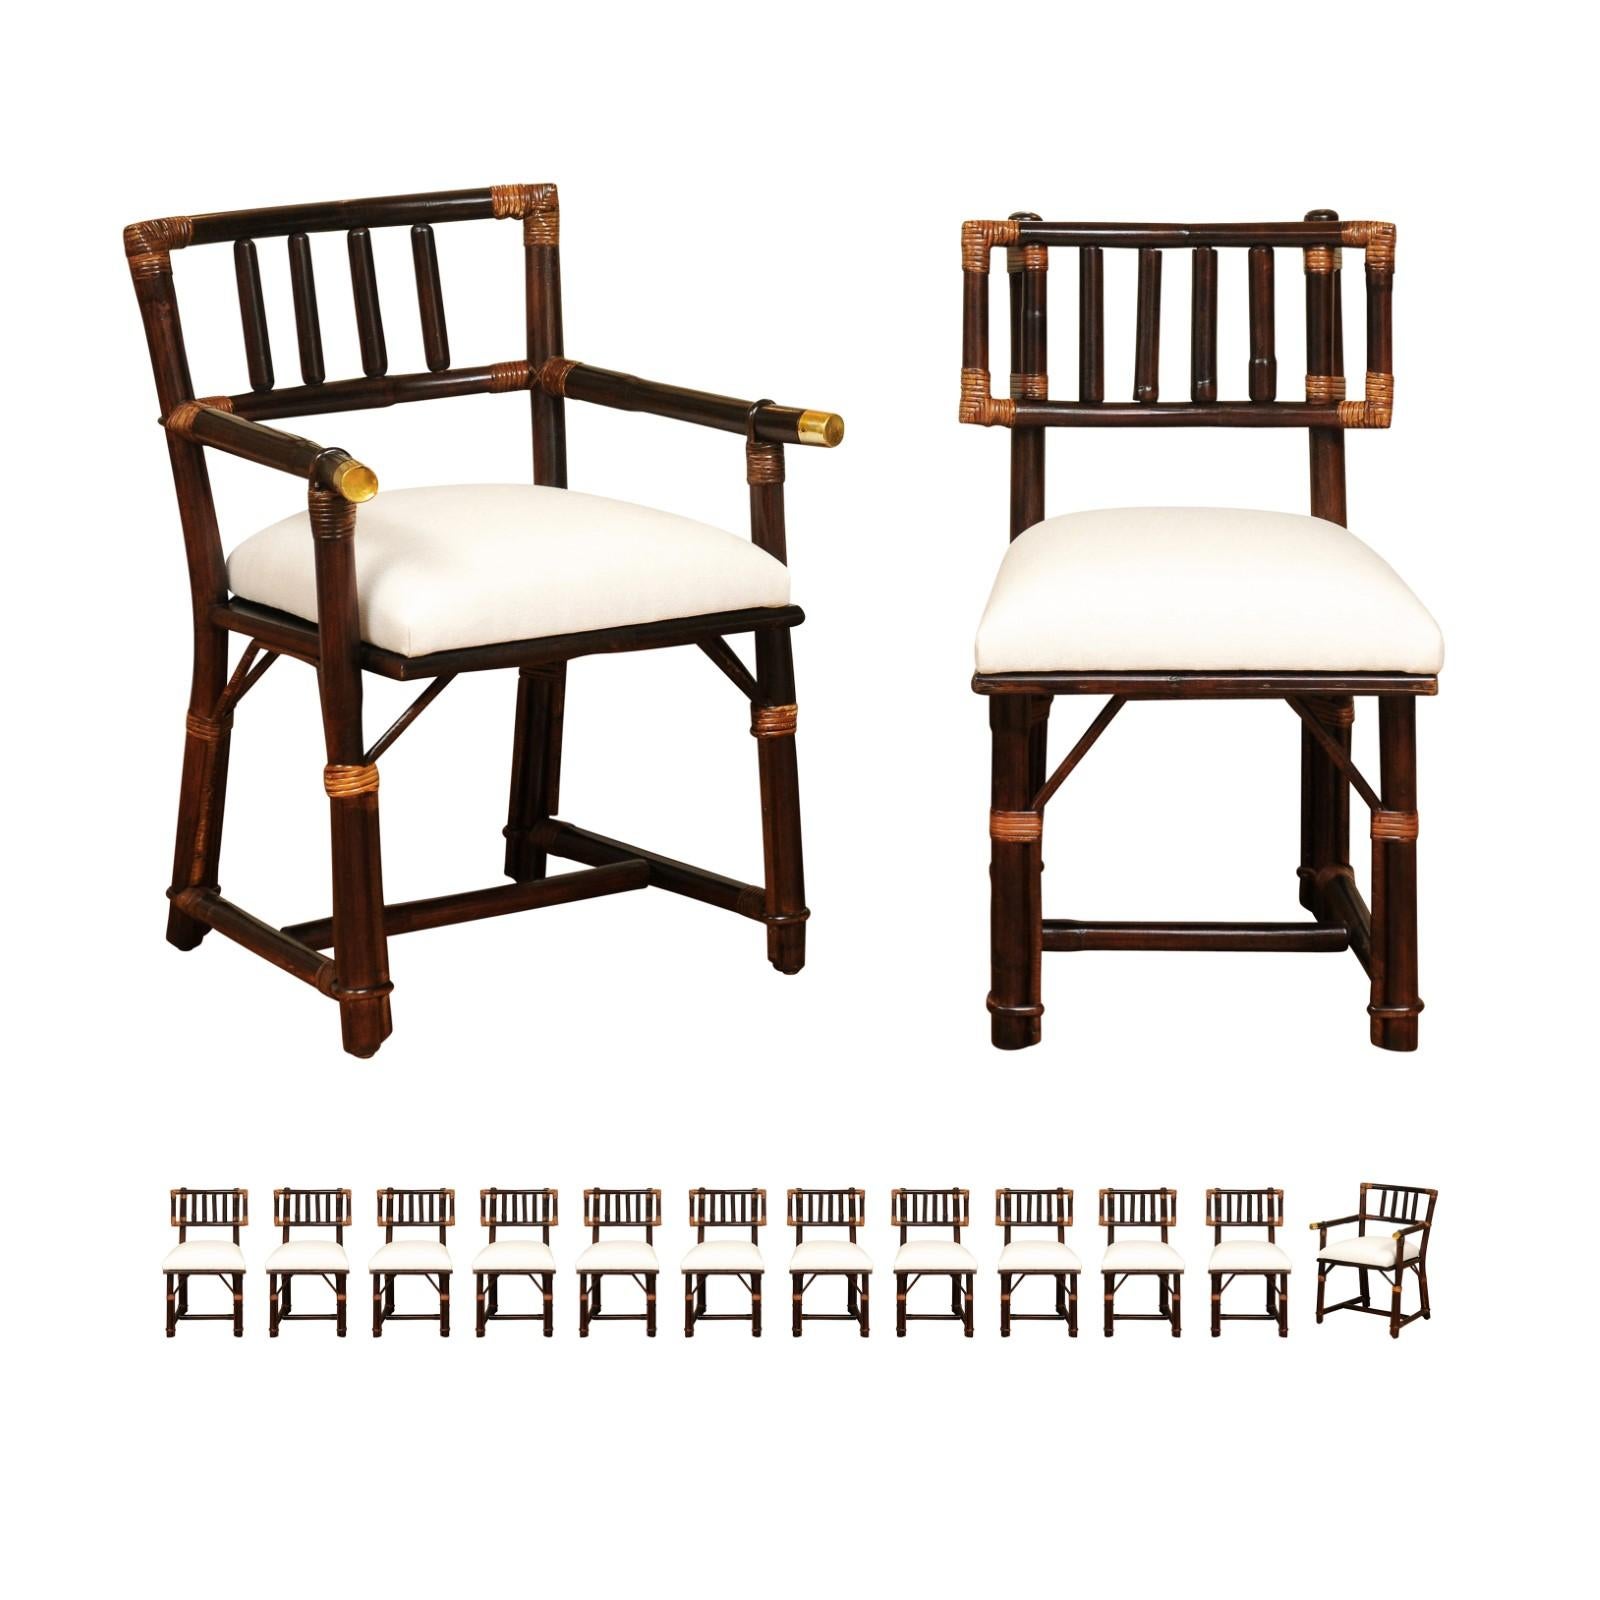 These magnificent dining chairs are shipped as professionally photographed and described in the listing narrative: Meticulously professionally restored and installation ready. This large restored set of difficult to find examples is Unique on the